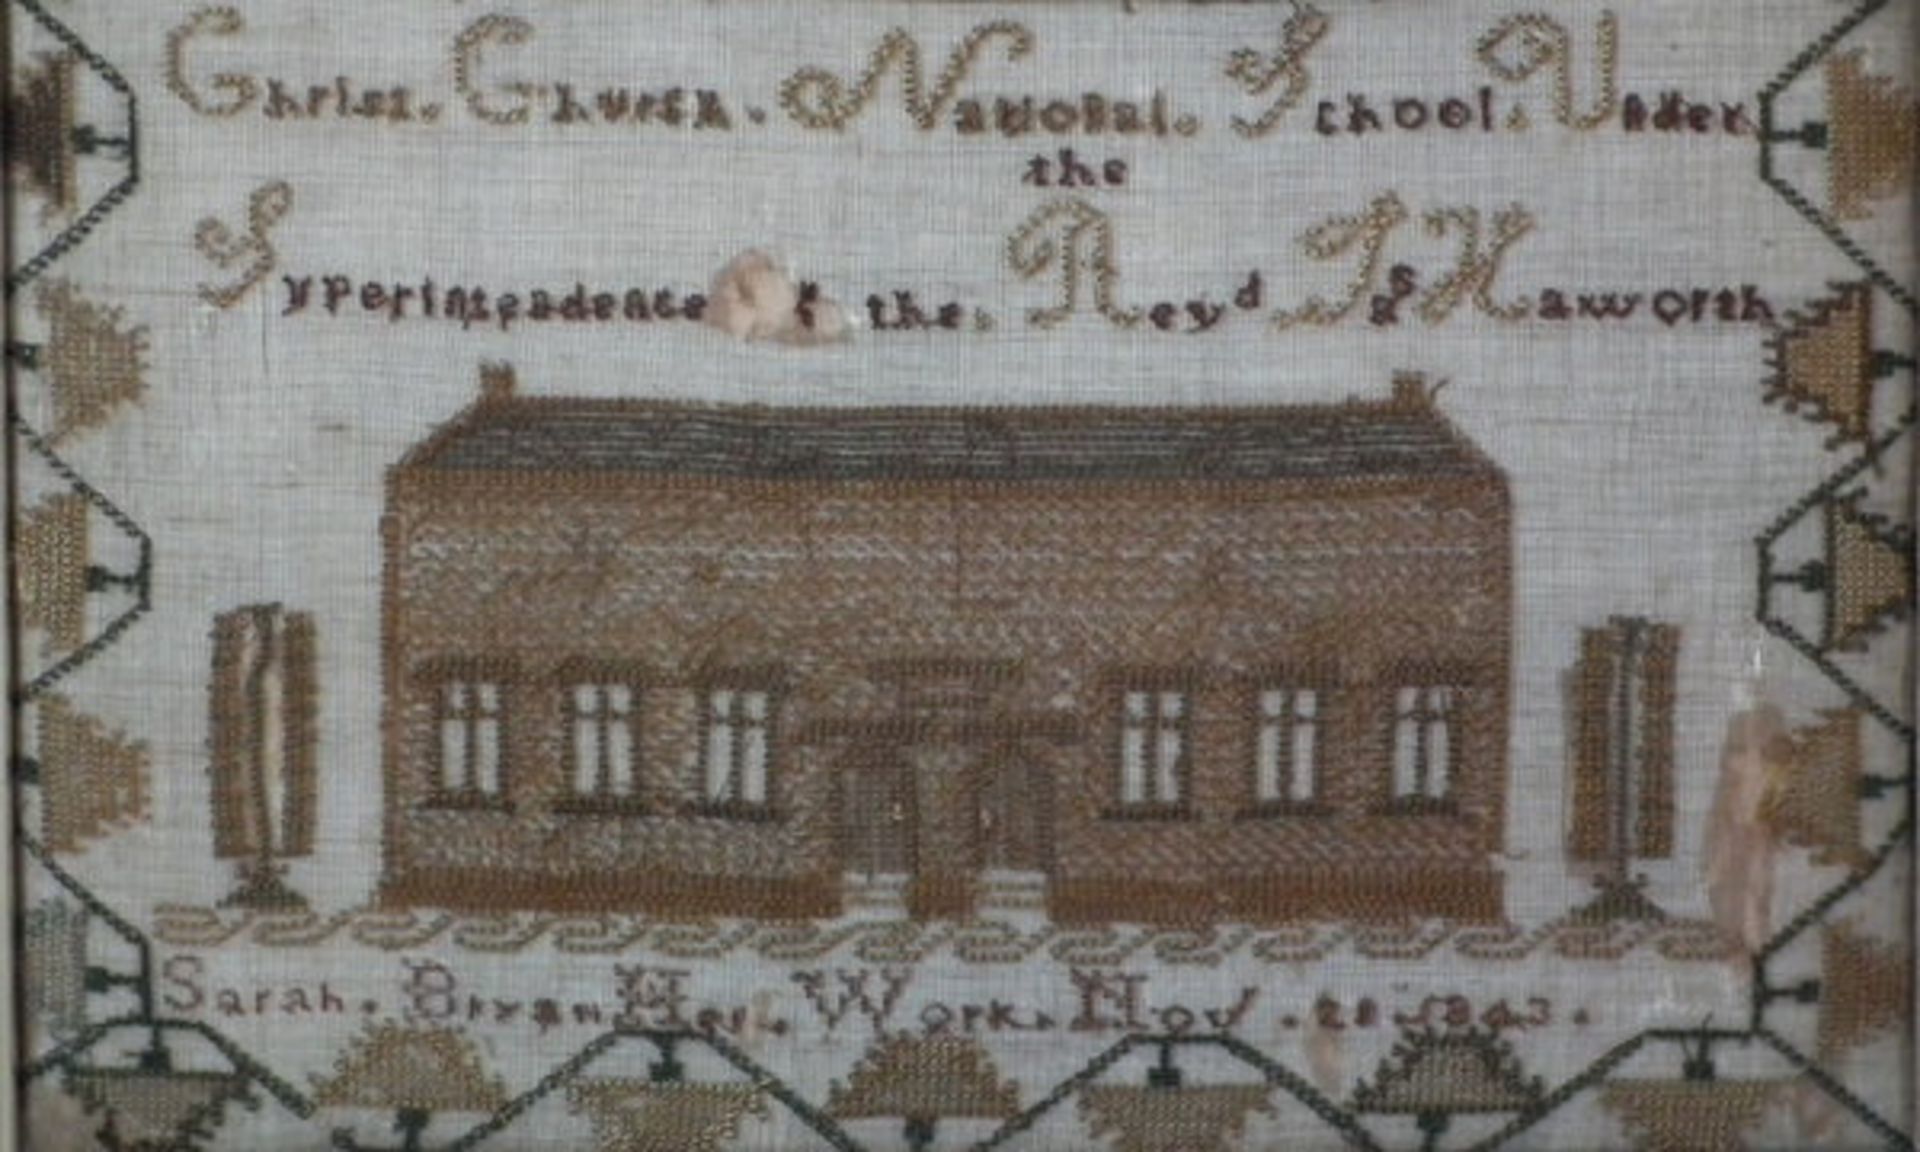 Needlework School Sampler dated 1843 by Sarah Bryan FREE UK DELIVERY - Image 4 of 38